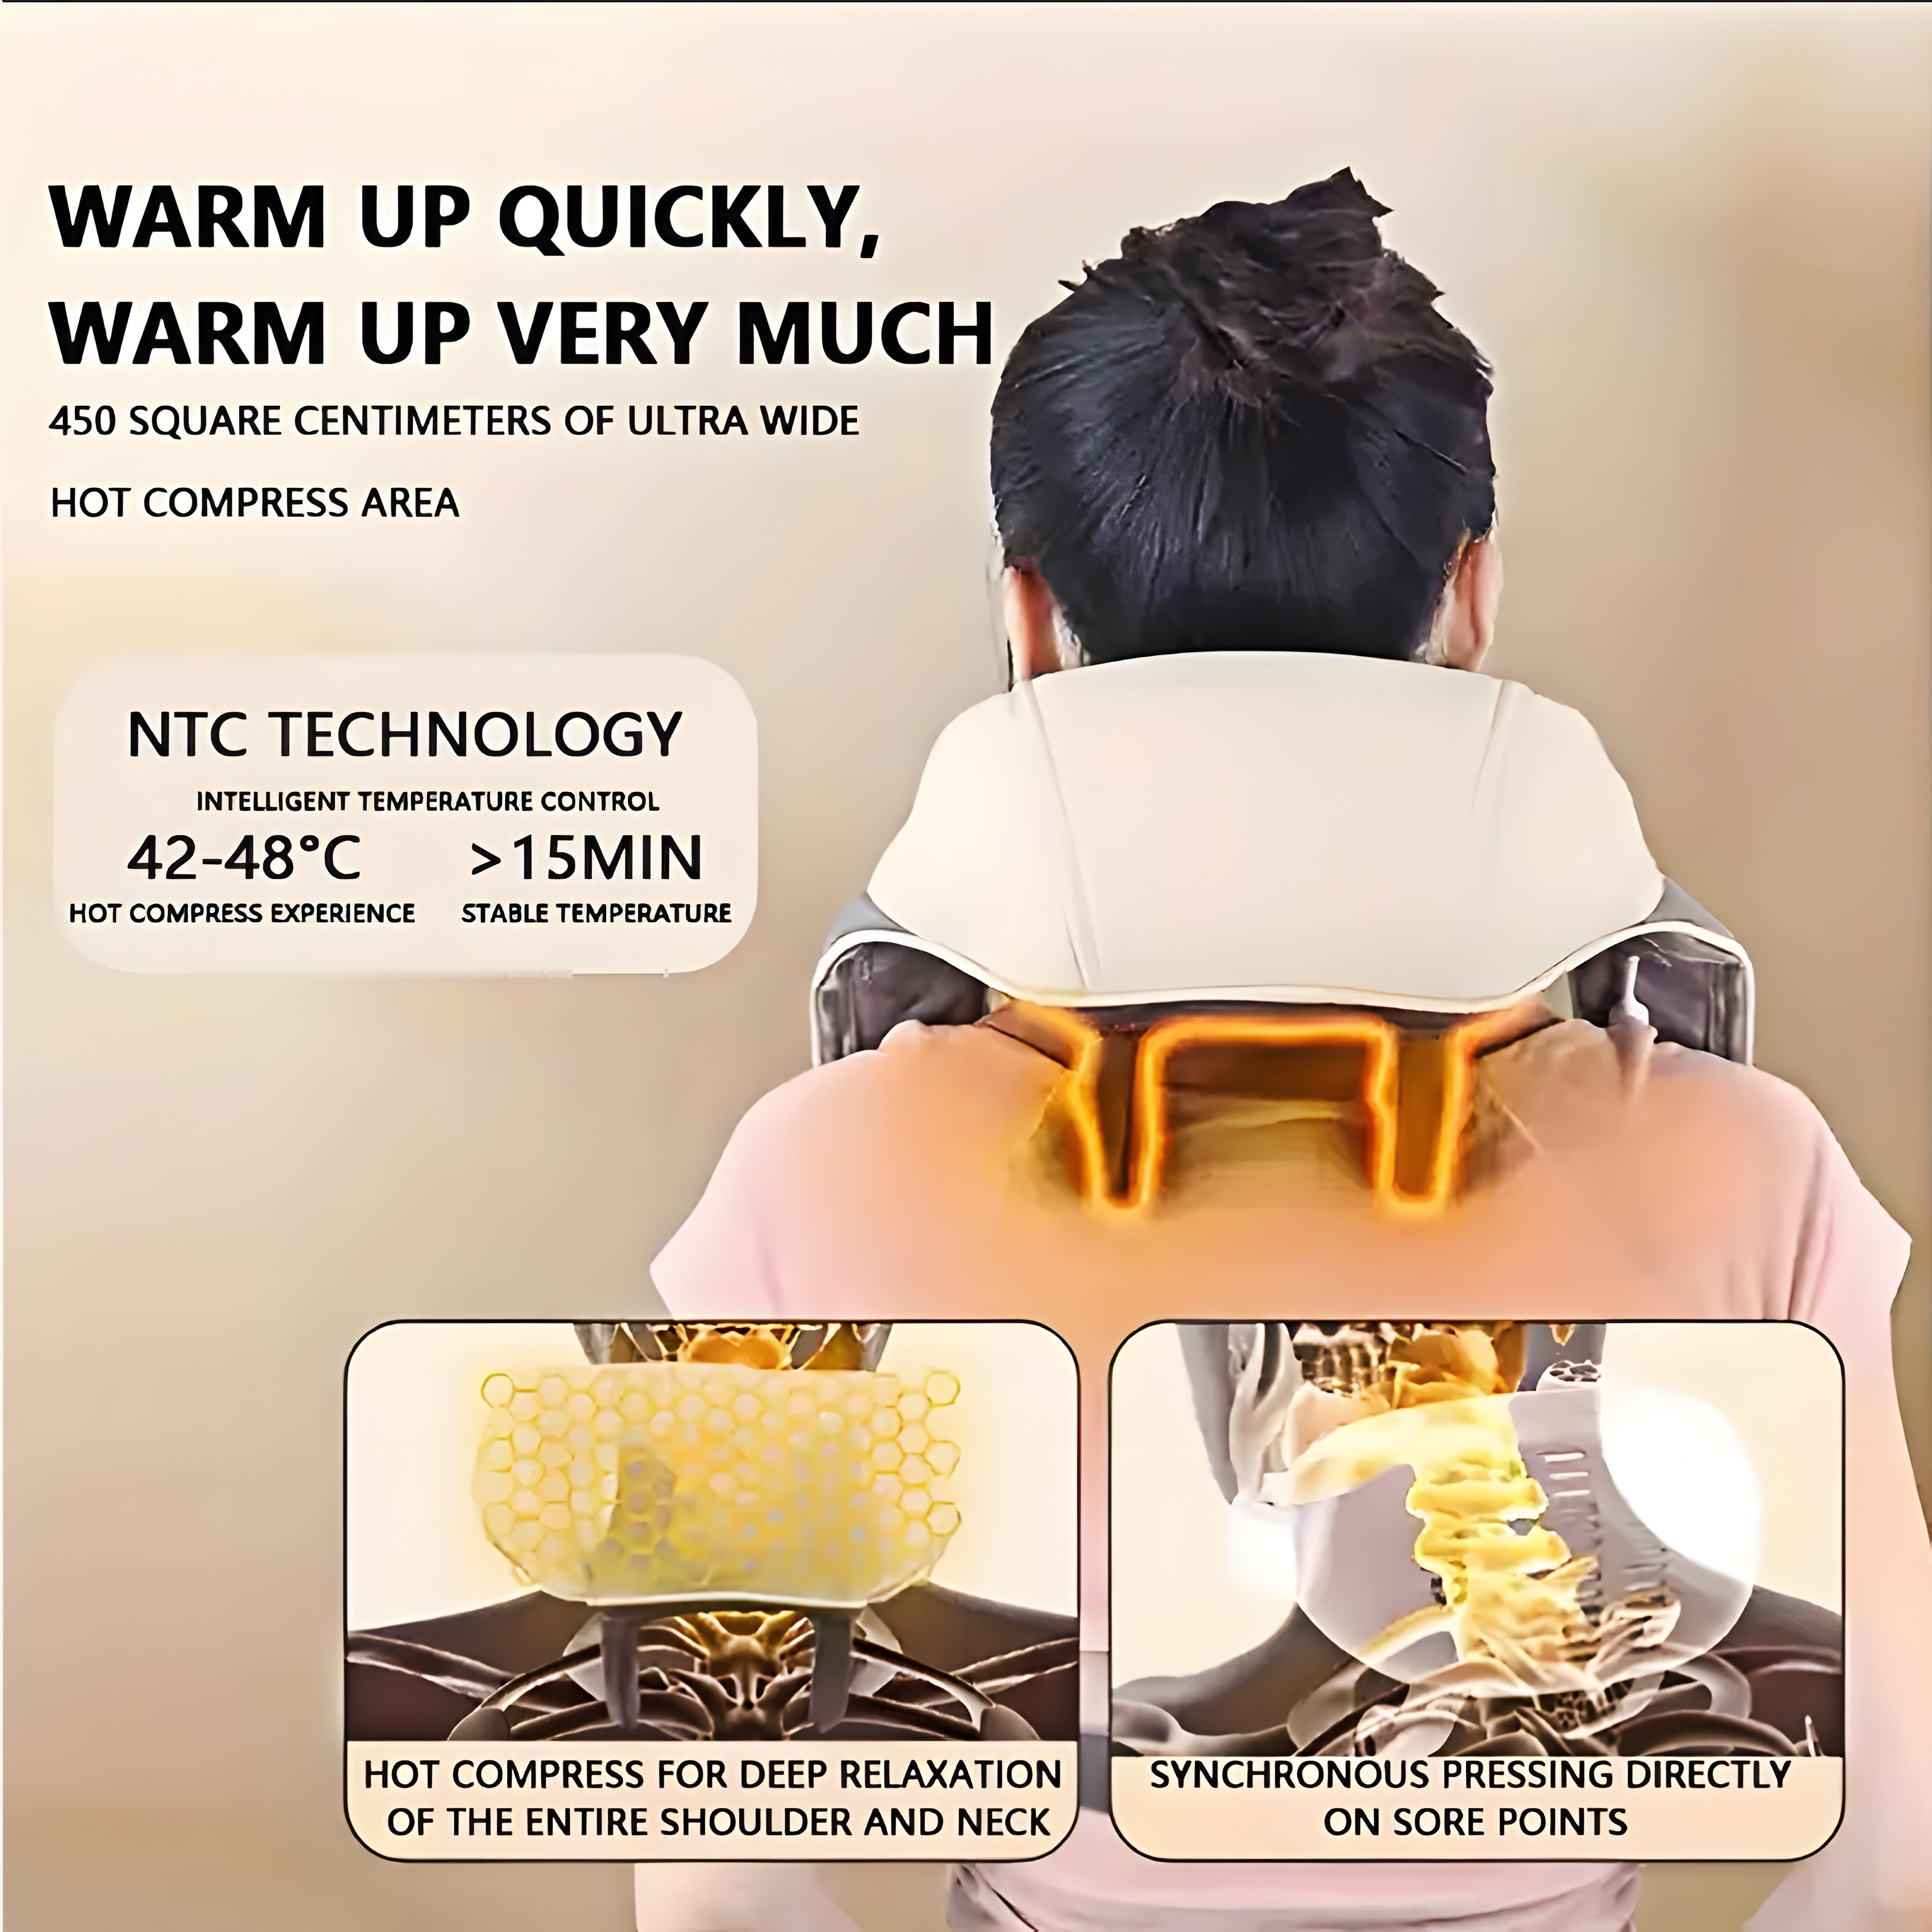 Use This Heated Neck Massager to Completely Relax